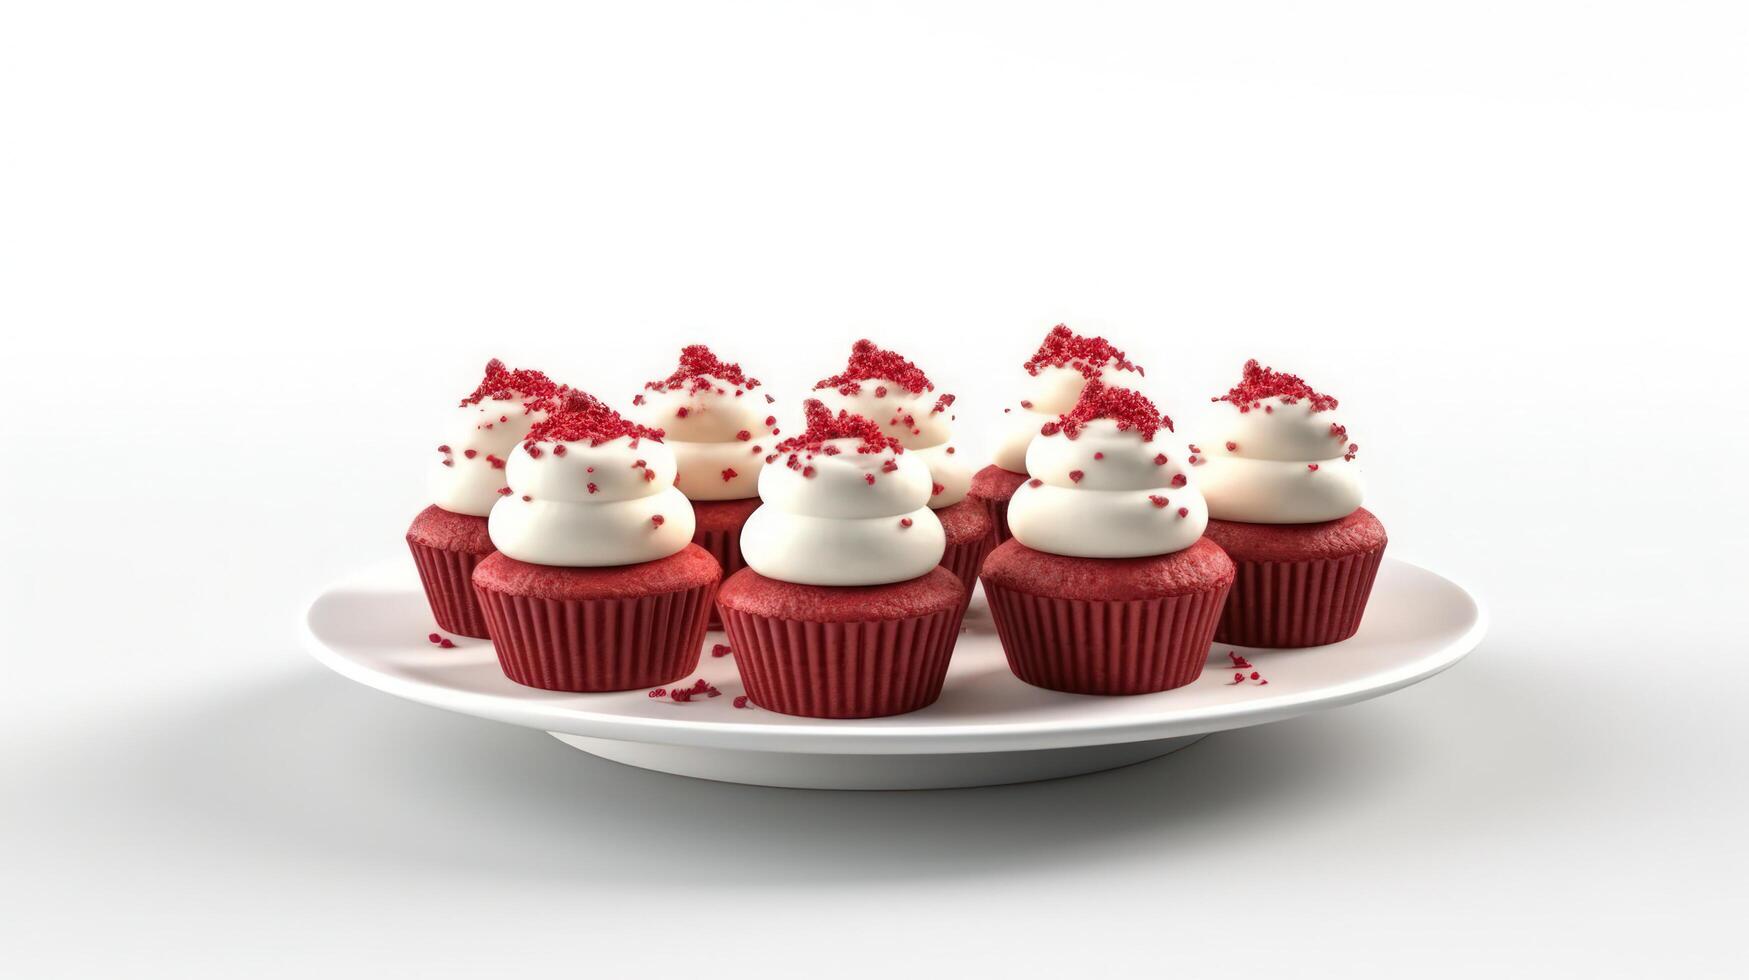 A plate of red velvet cupcakes with a cream cheese frosting and a sprinkle of red velvet crumbs, on a white background, photo